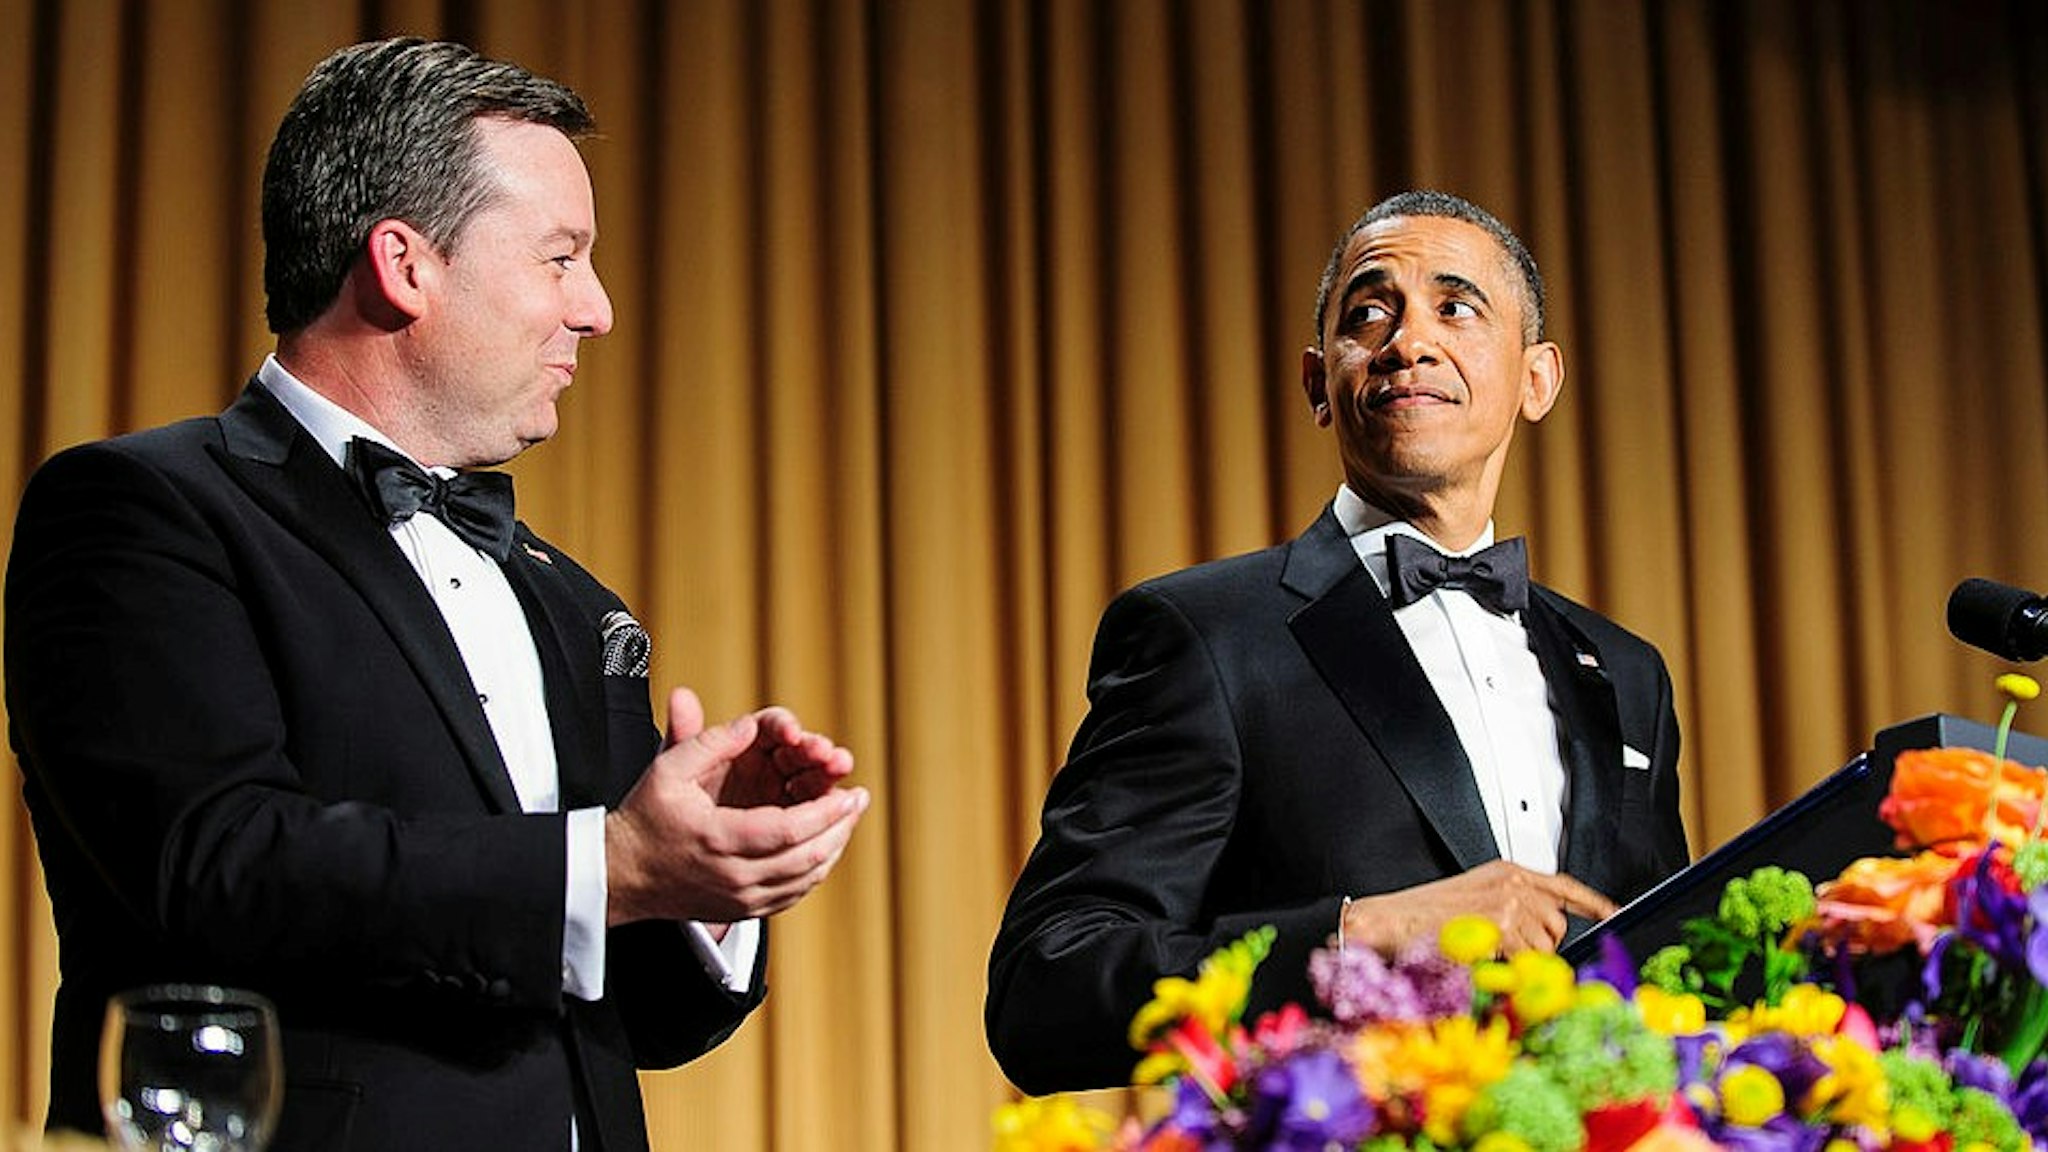 U.S. President Barack Obama, right, is introduced by White House Correspondents' Association (WHCA) President Ed Henry during the annual dinner in Washington, District of Columbia, U.S., on Saturday, April 27, 2013. The 99th annual dinner raises money for WHCA scholarships and honors the recipients of the organization's journalism awards. Photographer: